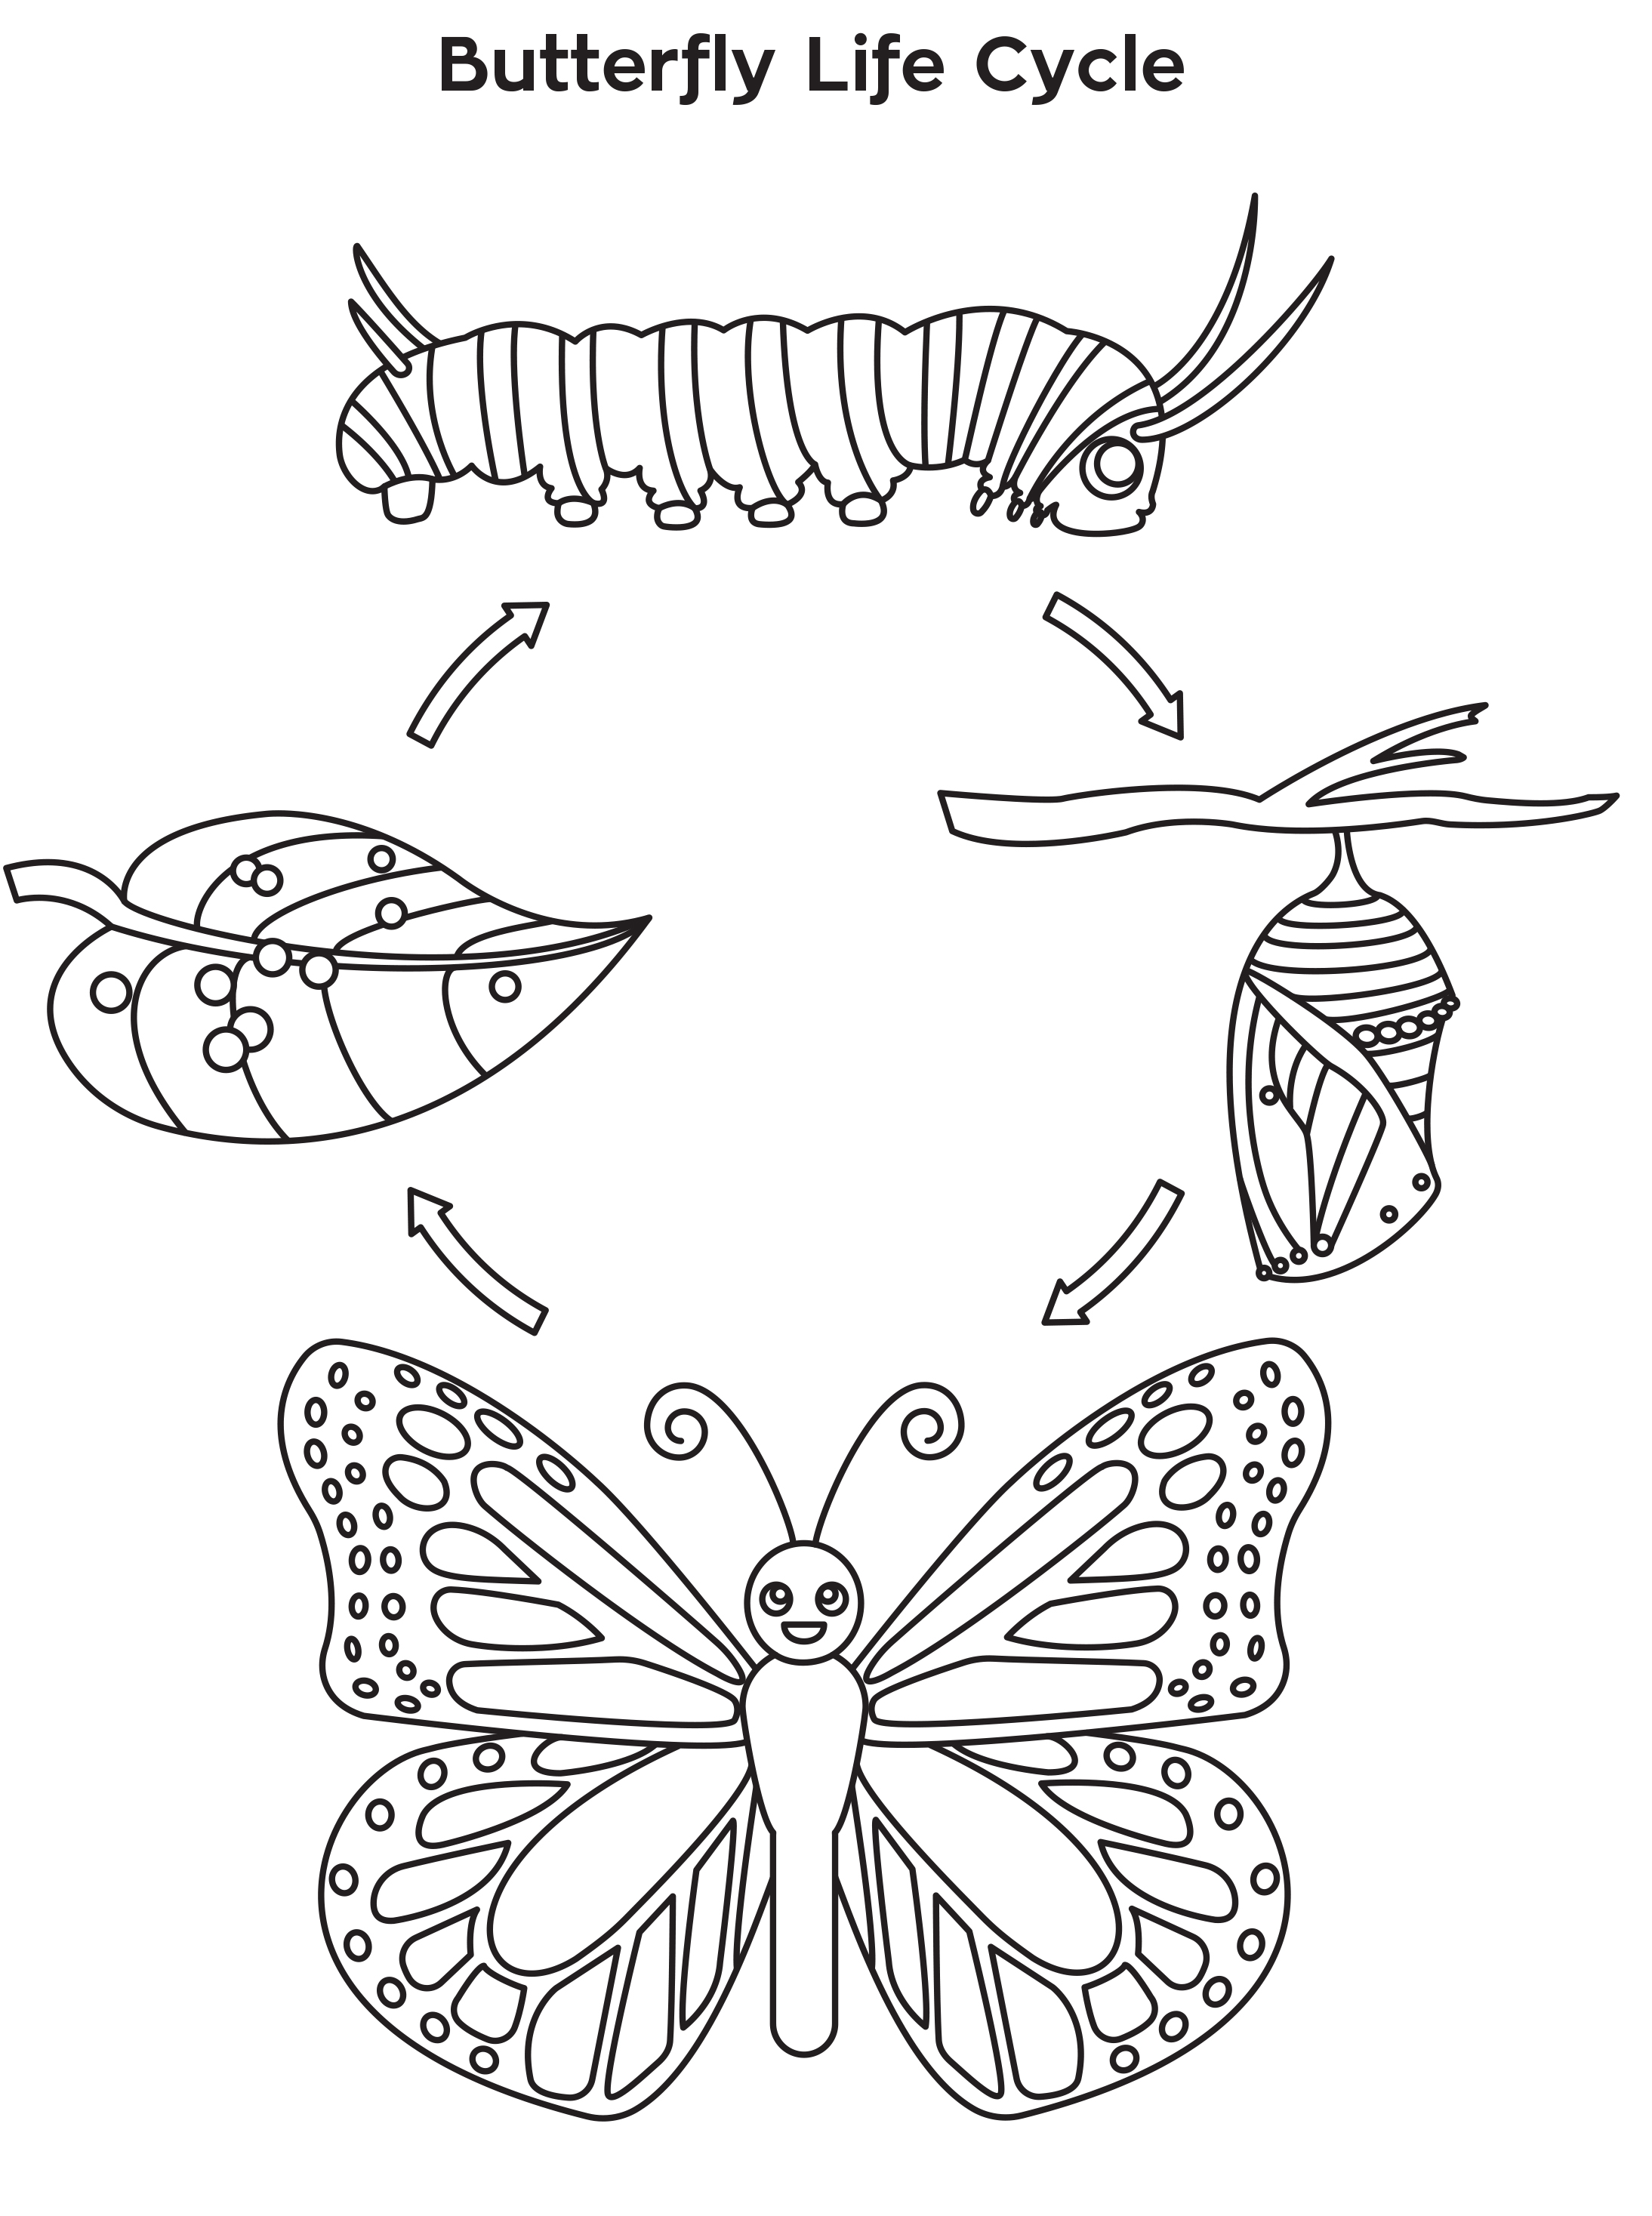 butterfly-life-cycle-activities-free-printables-butterfly-life